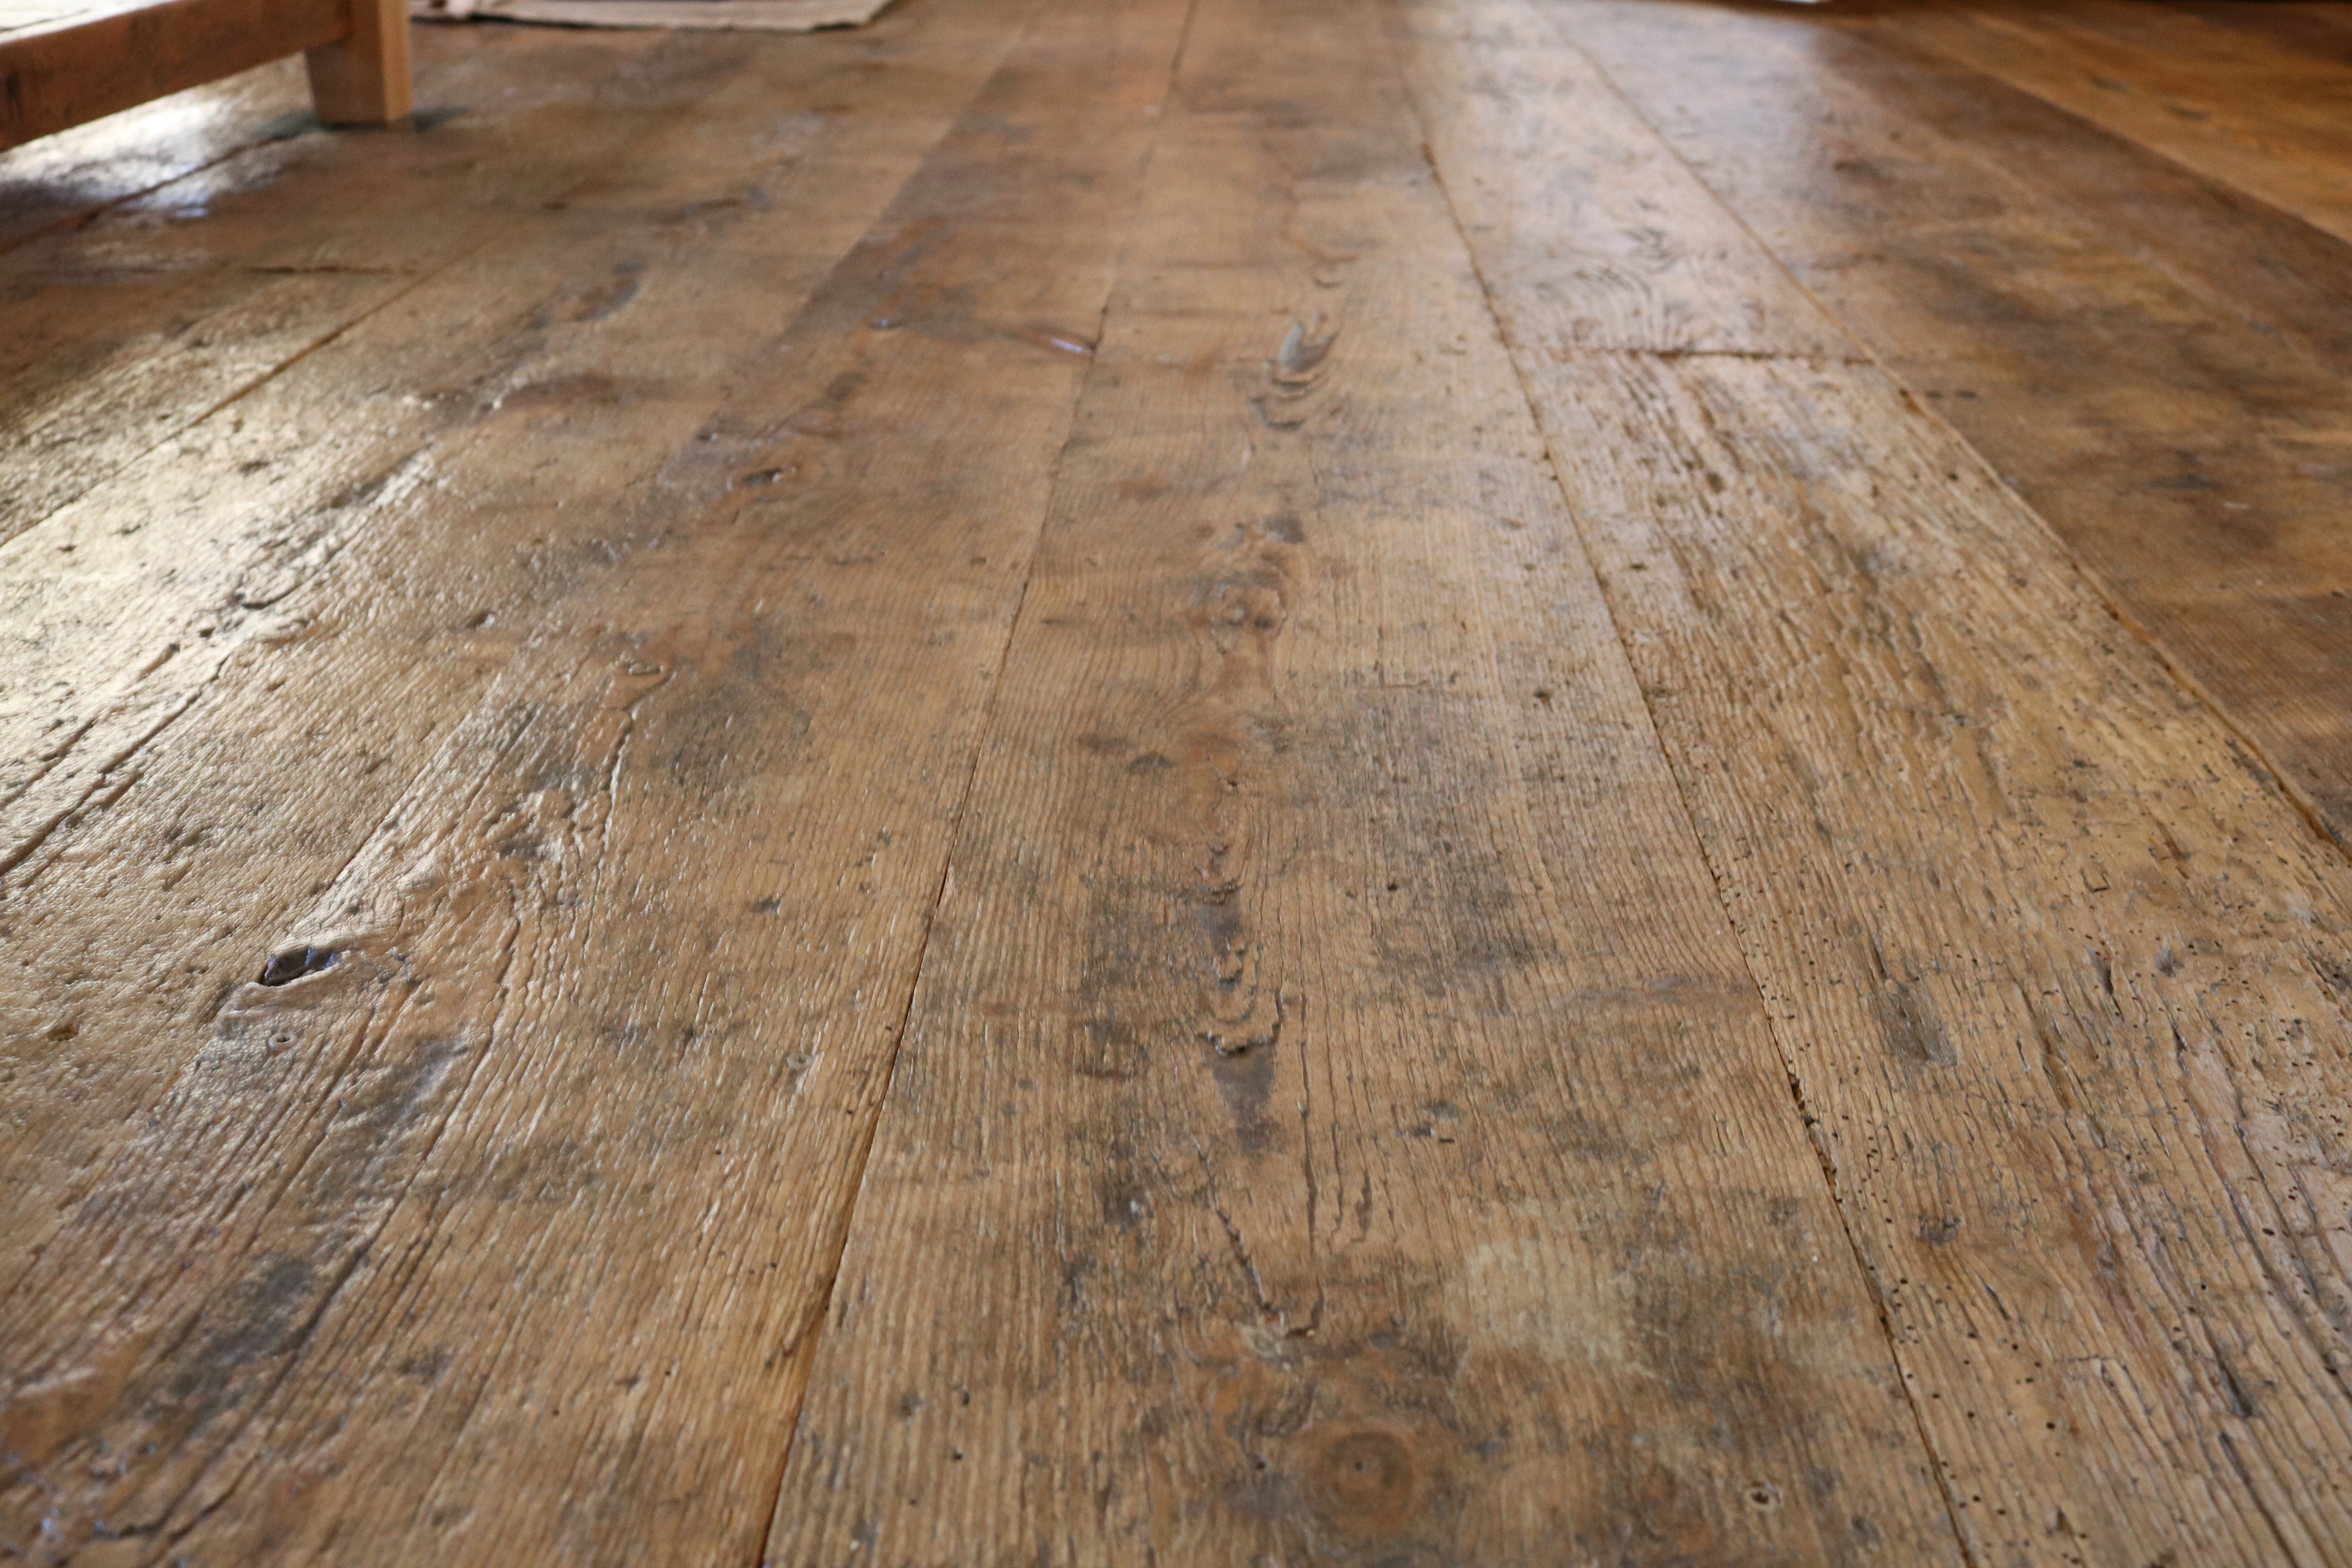 Wide plank flooring made from barn board in a residence in Yarmouth, Maine, sourced by Rousseau Reclaimed Lumber & Flooring